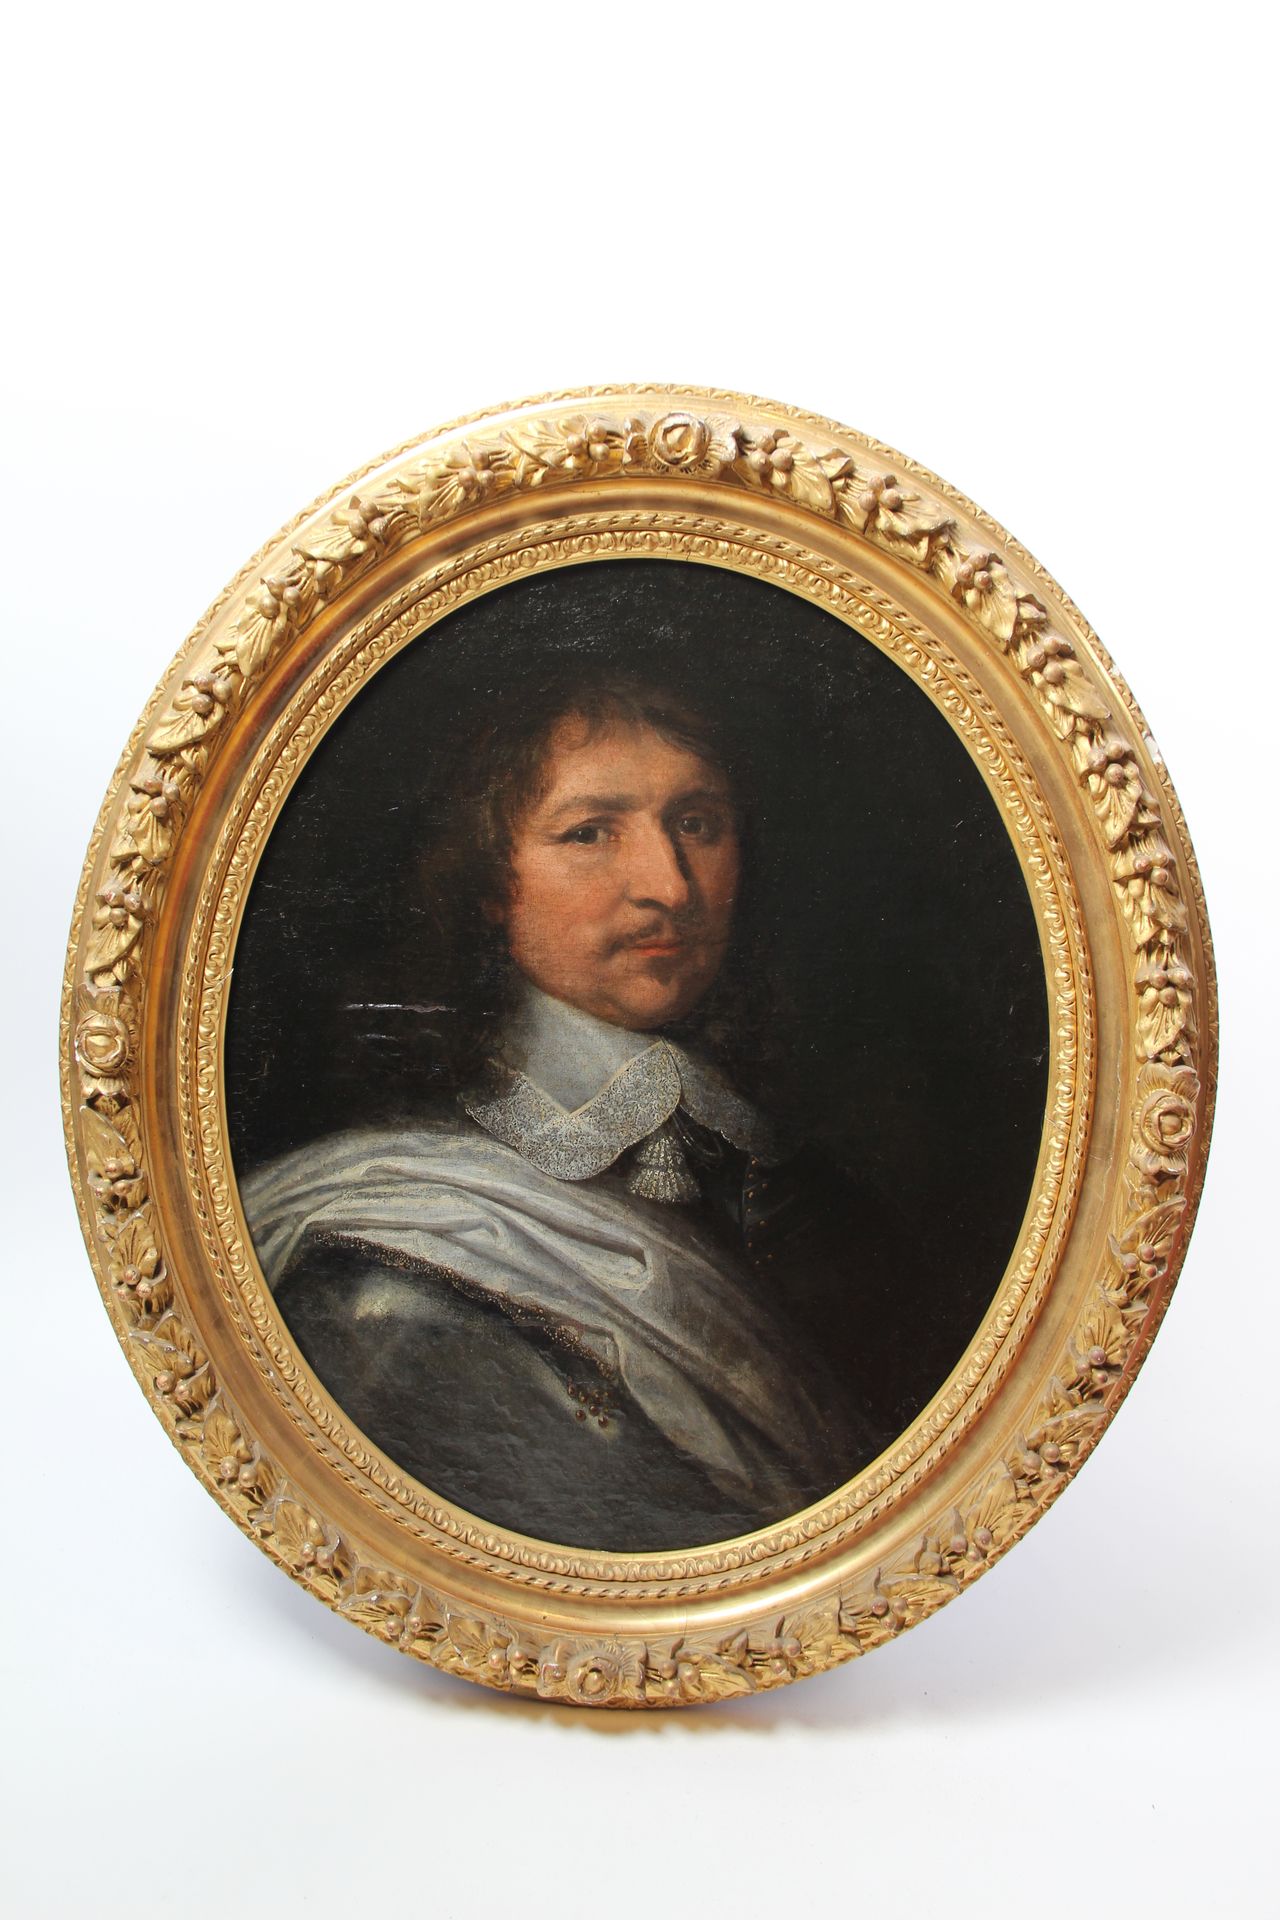 Null FRENCH SCHOOL circa 1640
Portrait of a man in armor with a lace collar
Oval&hellip;